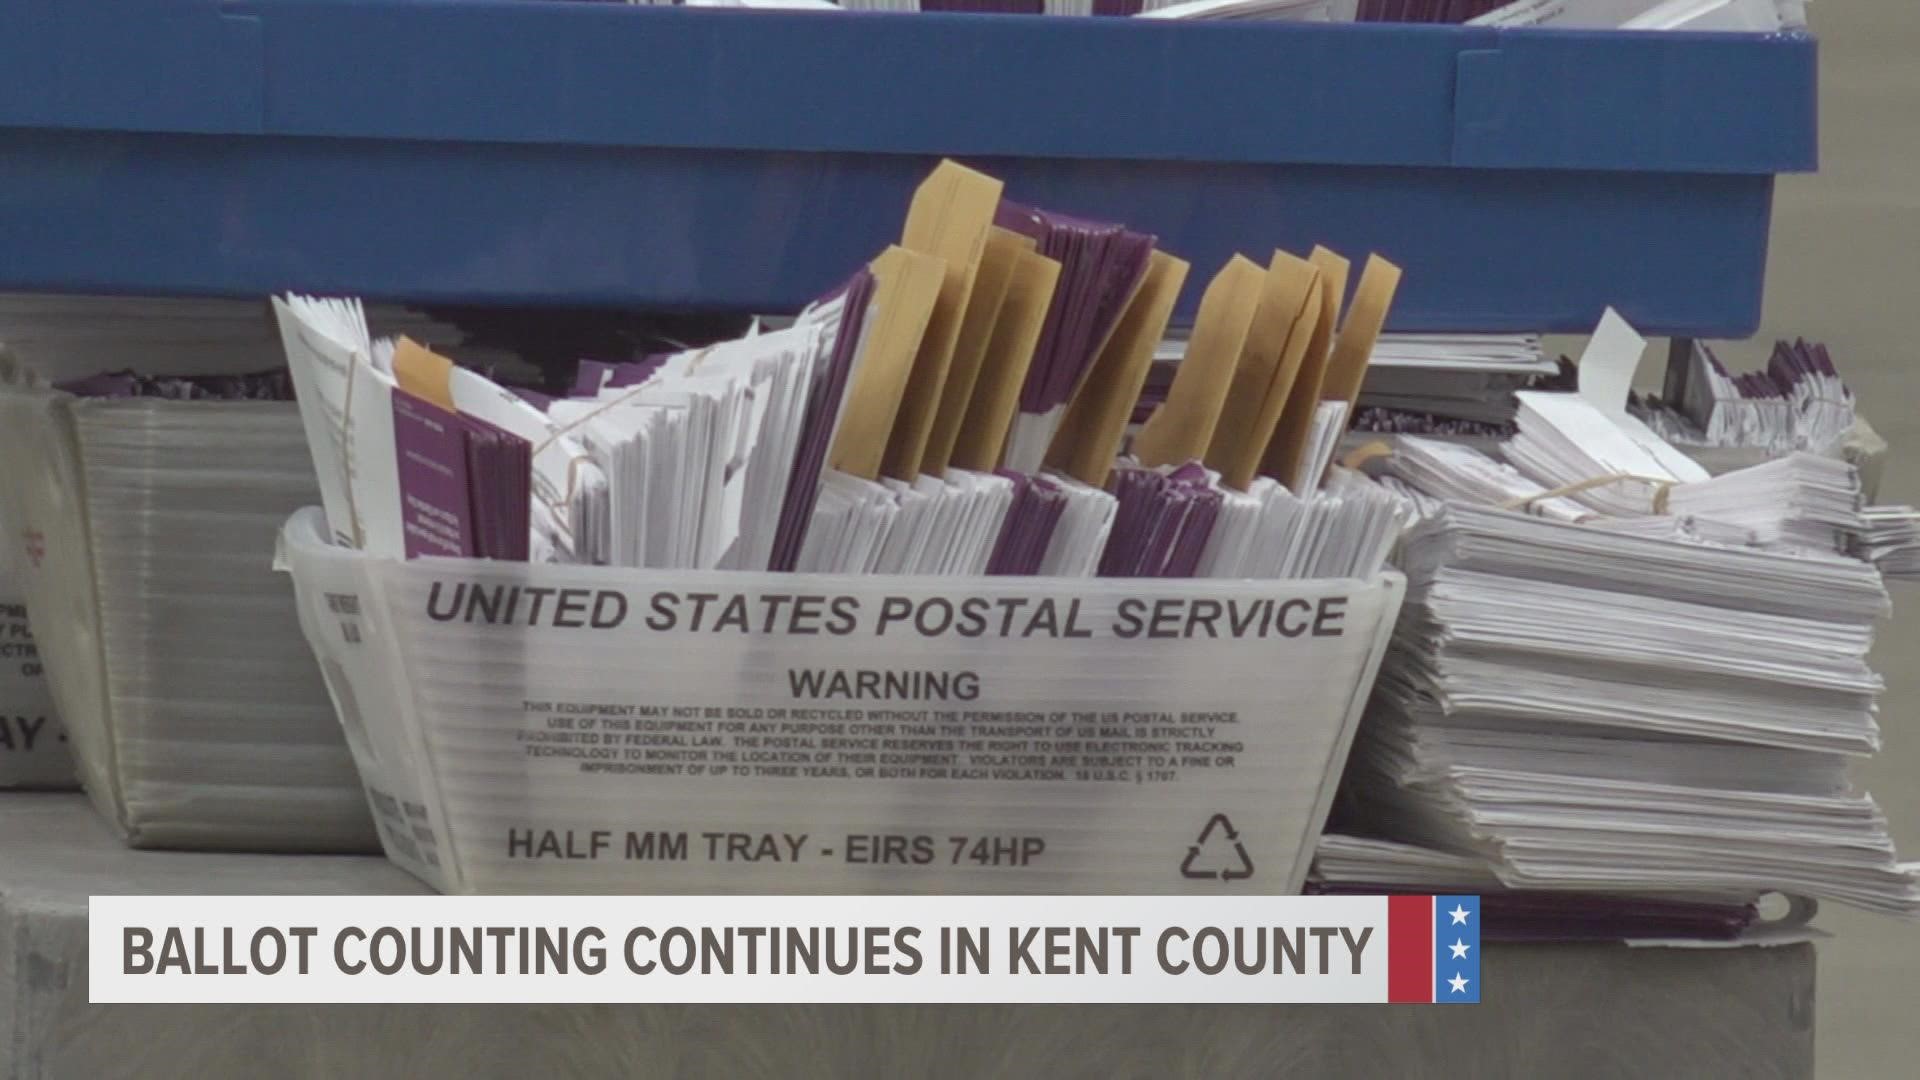 In Kent County, more than 120,000 absentee ballots were returned. County Clerk Lisa Lyons says all precincts are now fully reporting their results.